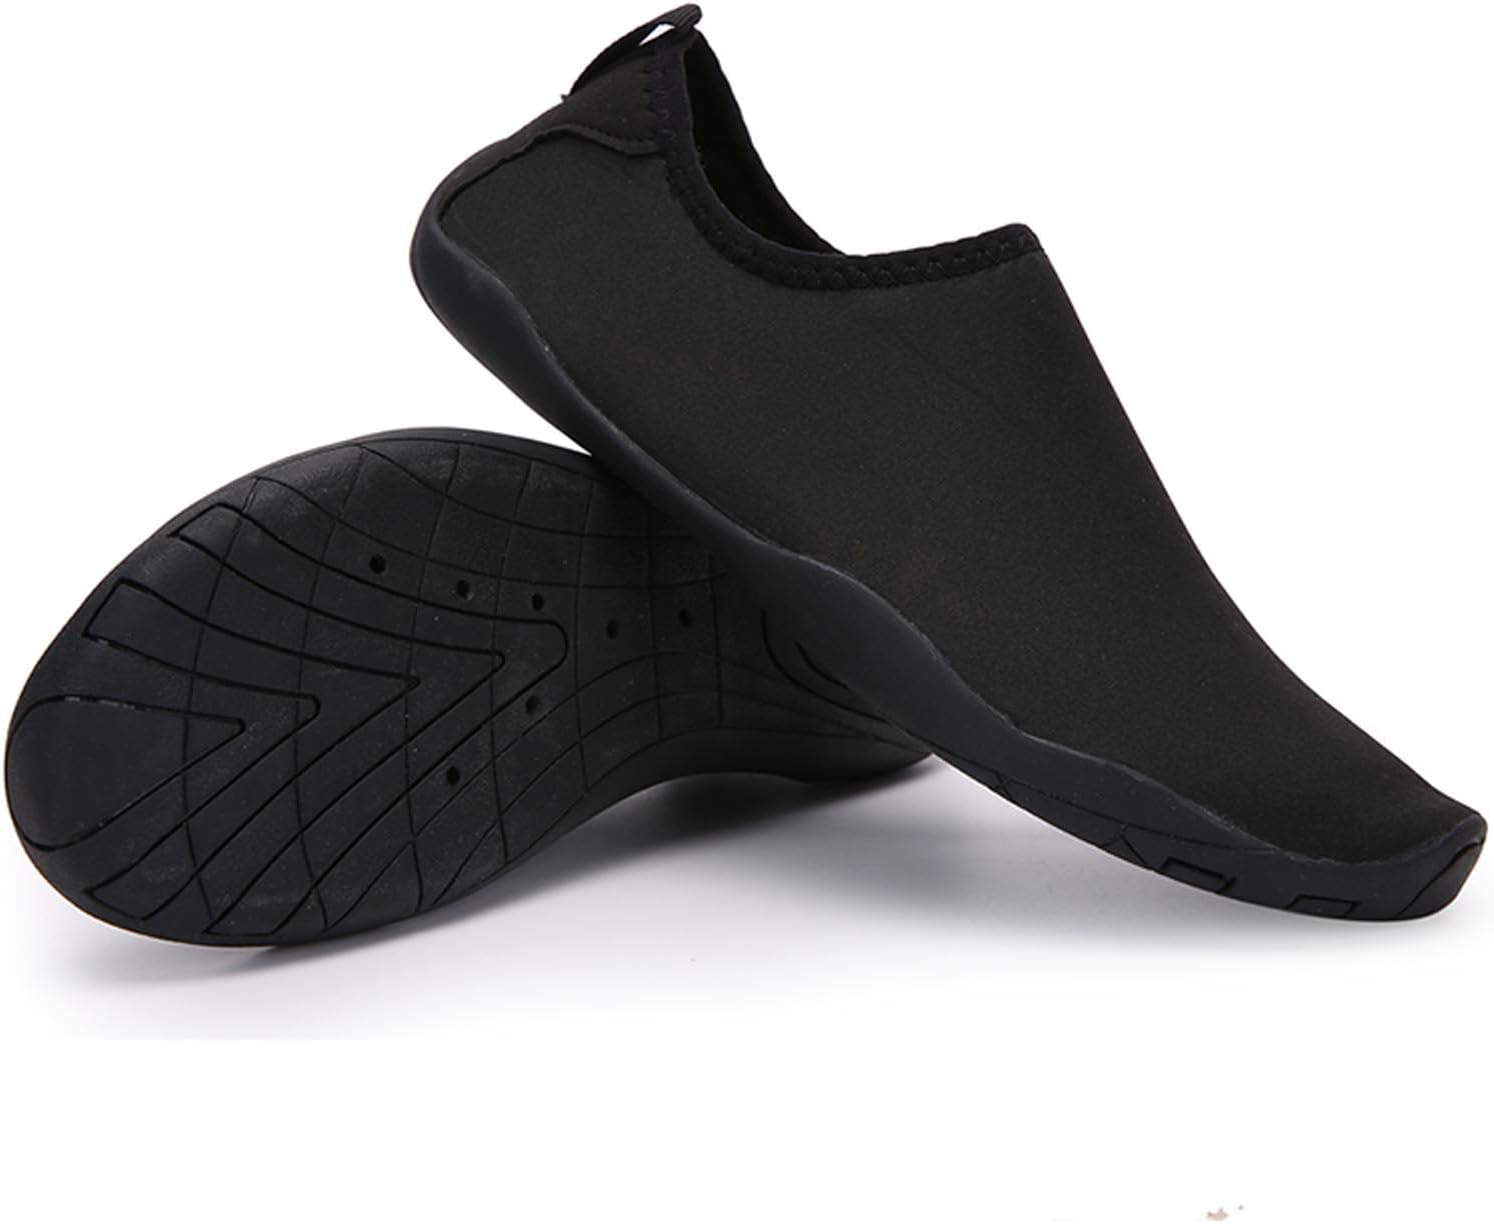 Hotroad Lightweight One-for-All Minimalism Barefoot Shoes